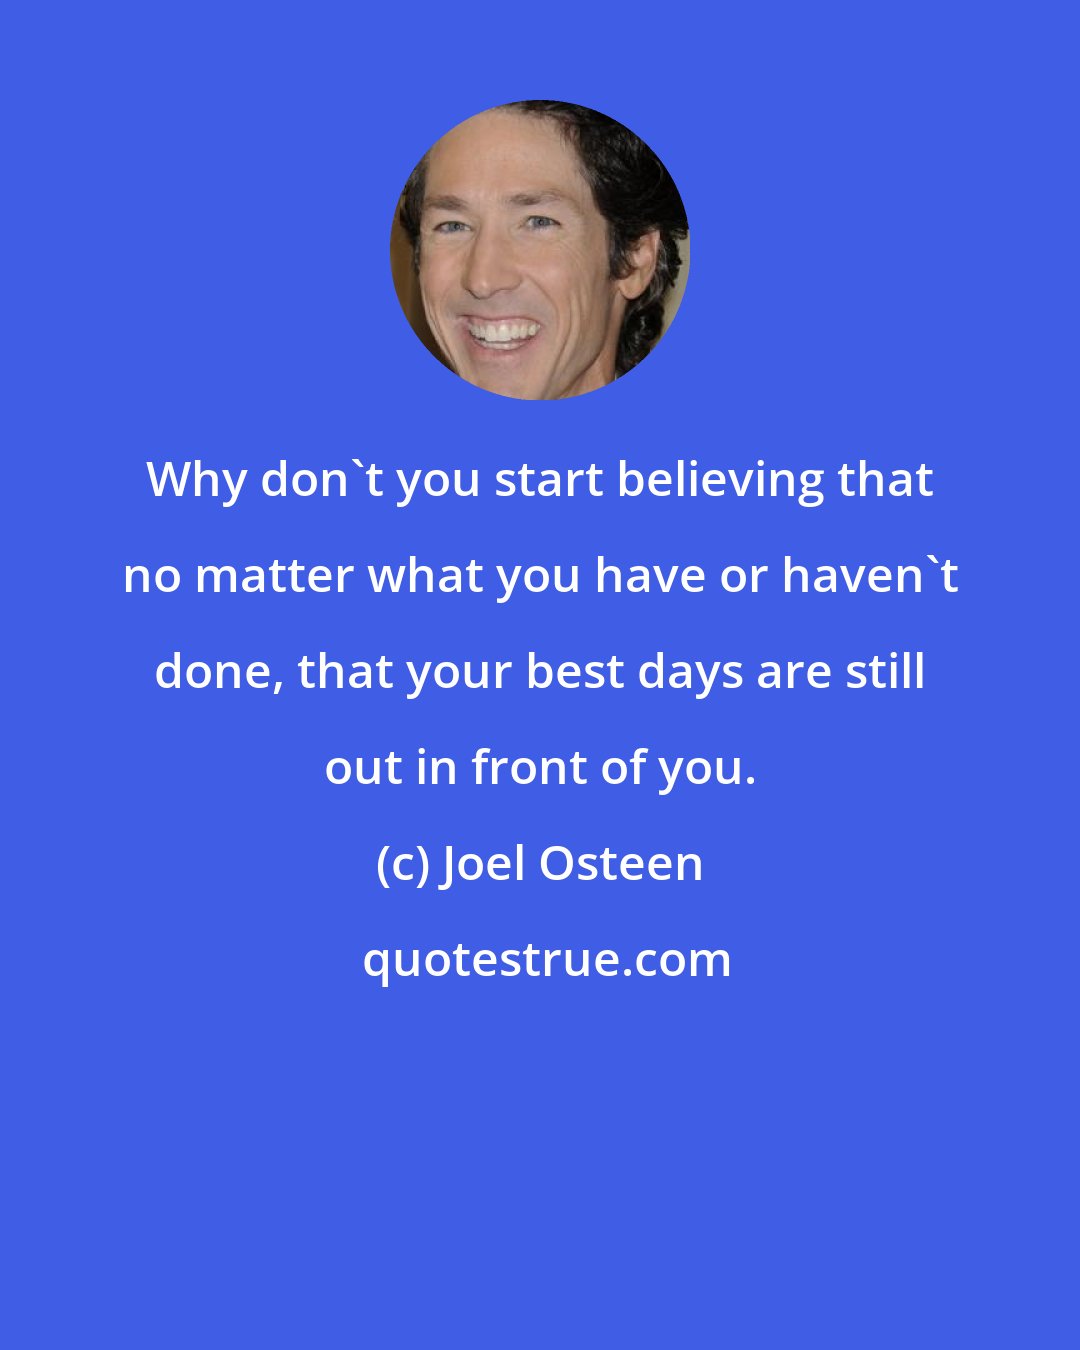 Joel Osteen: Why don't you start believing that no matter what you have or haven't done, that your best days are still out in front of you.